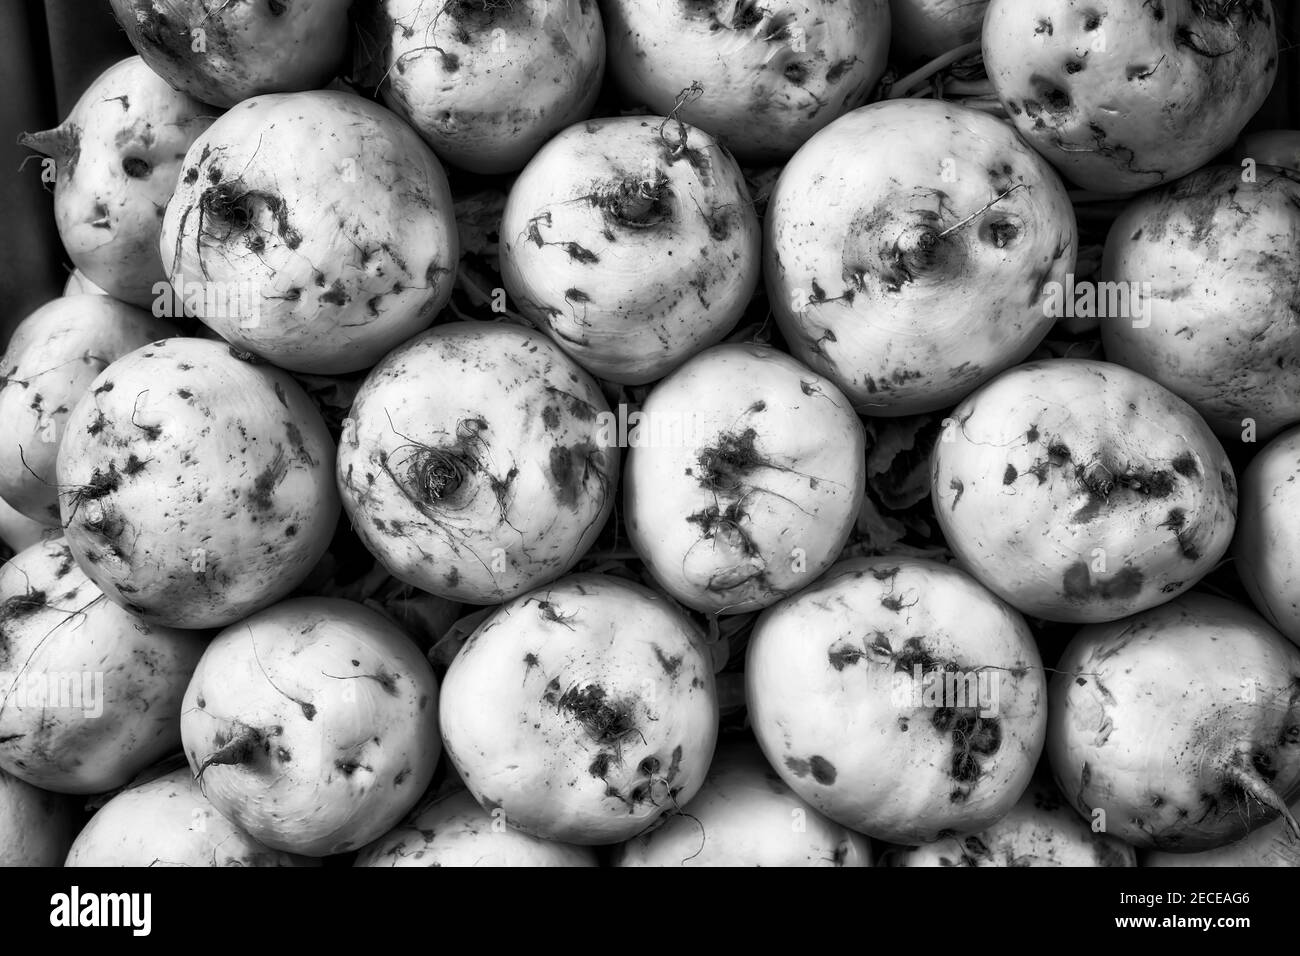 White round roots of radish vegetable grown in Japan - traditional diet for island nation in colourless impression. Stock Photo